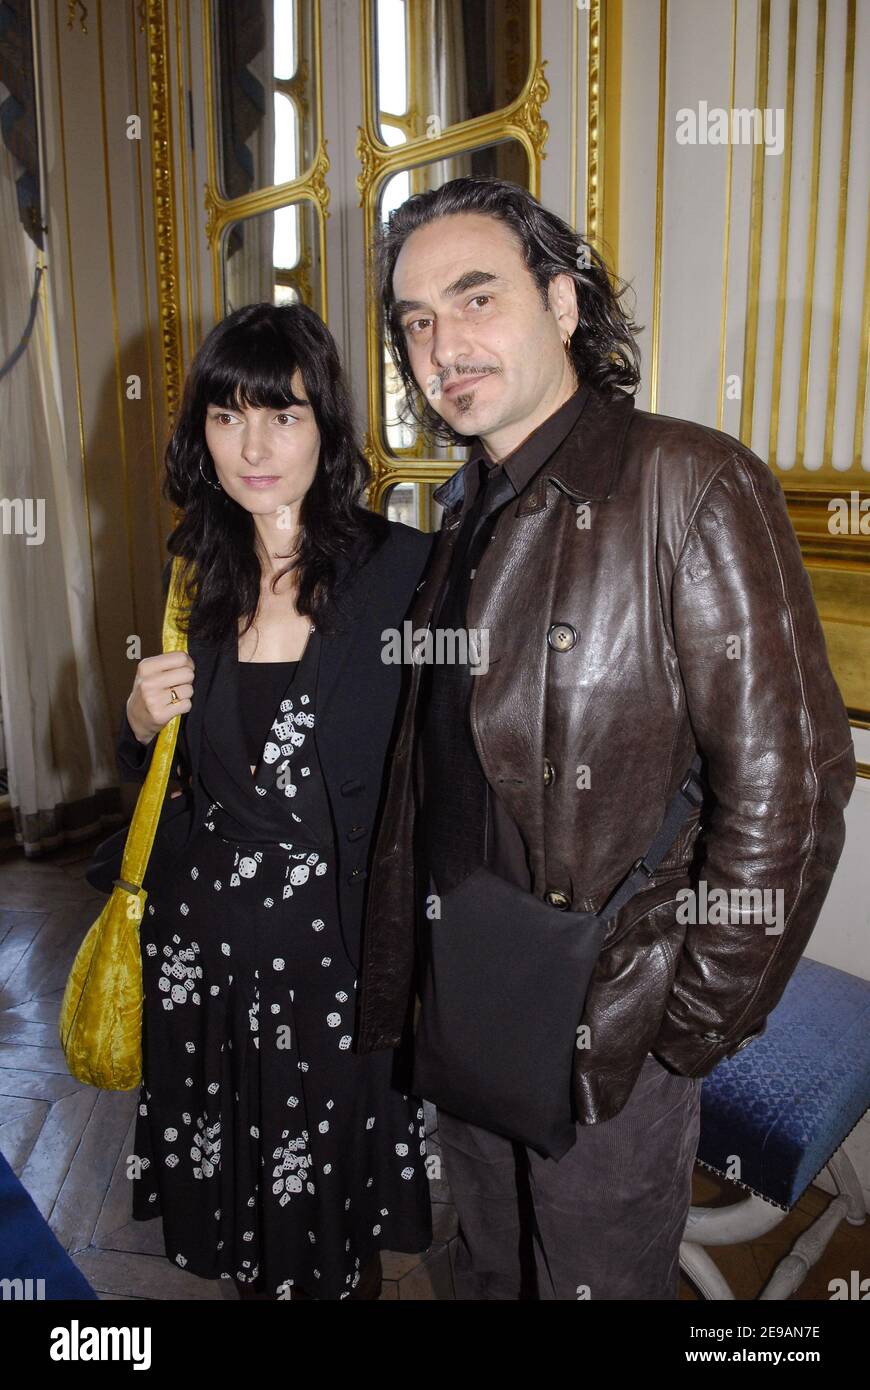 Swiss singer Stephane Eicher and his wife attend a ceremony where film director Etienne Chatilliez, humorist Sylvie Joly, musician Manu Katche and director and actor Philippe Harel were honored with the Legion of Honor by Culture Minister Renaud Donnedieu de Fabres at its Ministry in Paris on June 7, 2006. Photo by Bruno Klein/ABACAPRESS.COM Stock Photo